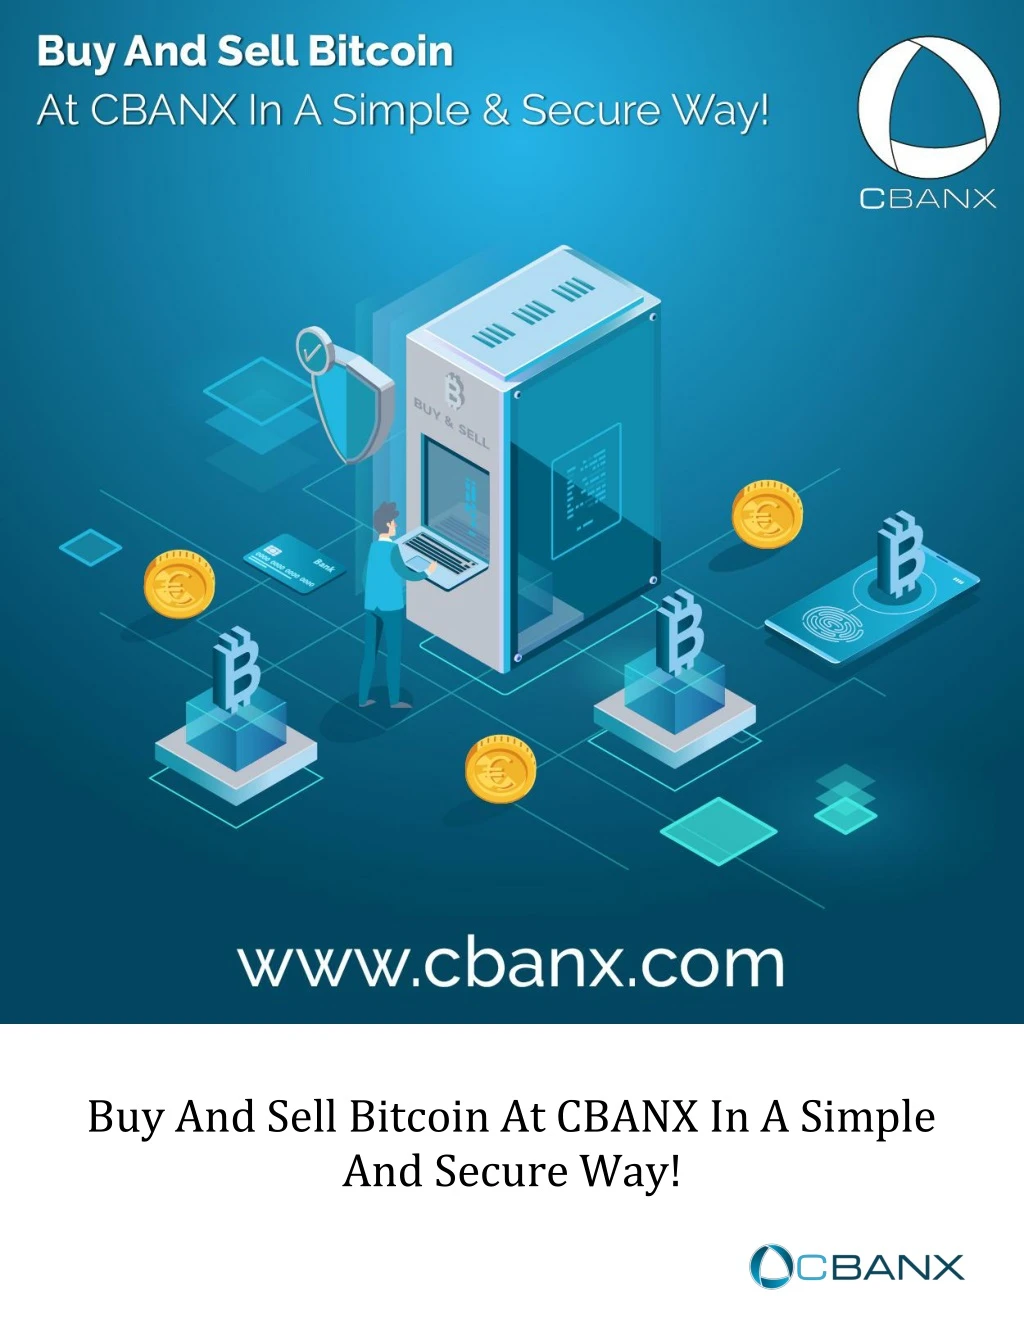 buy and sell bitcoin at cbanx in a simple